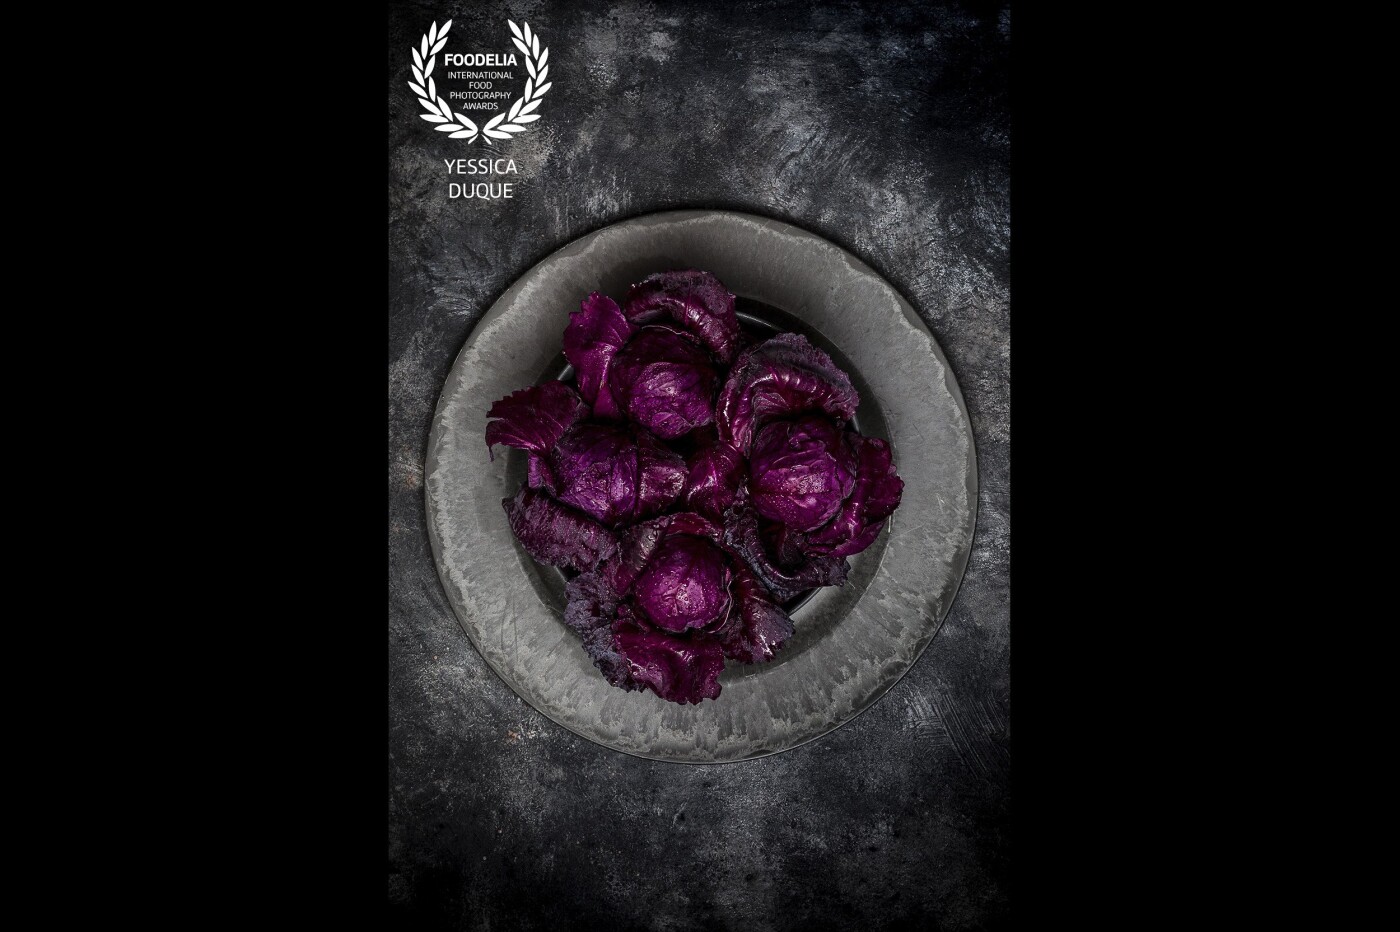 Red cabbage Nebulosa<br />
Humble, fresh and Magestic Red Baby Cabbages <br />
Camera: Canon Canon EOS 5D Mark III<br />
Lens: 50 mm<br />
Settings: ƒ/11 1/200 ISO320, Daylight 